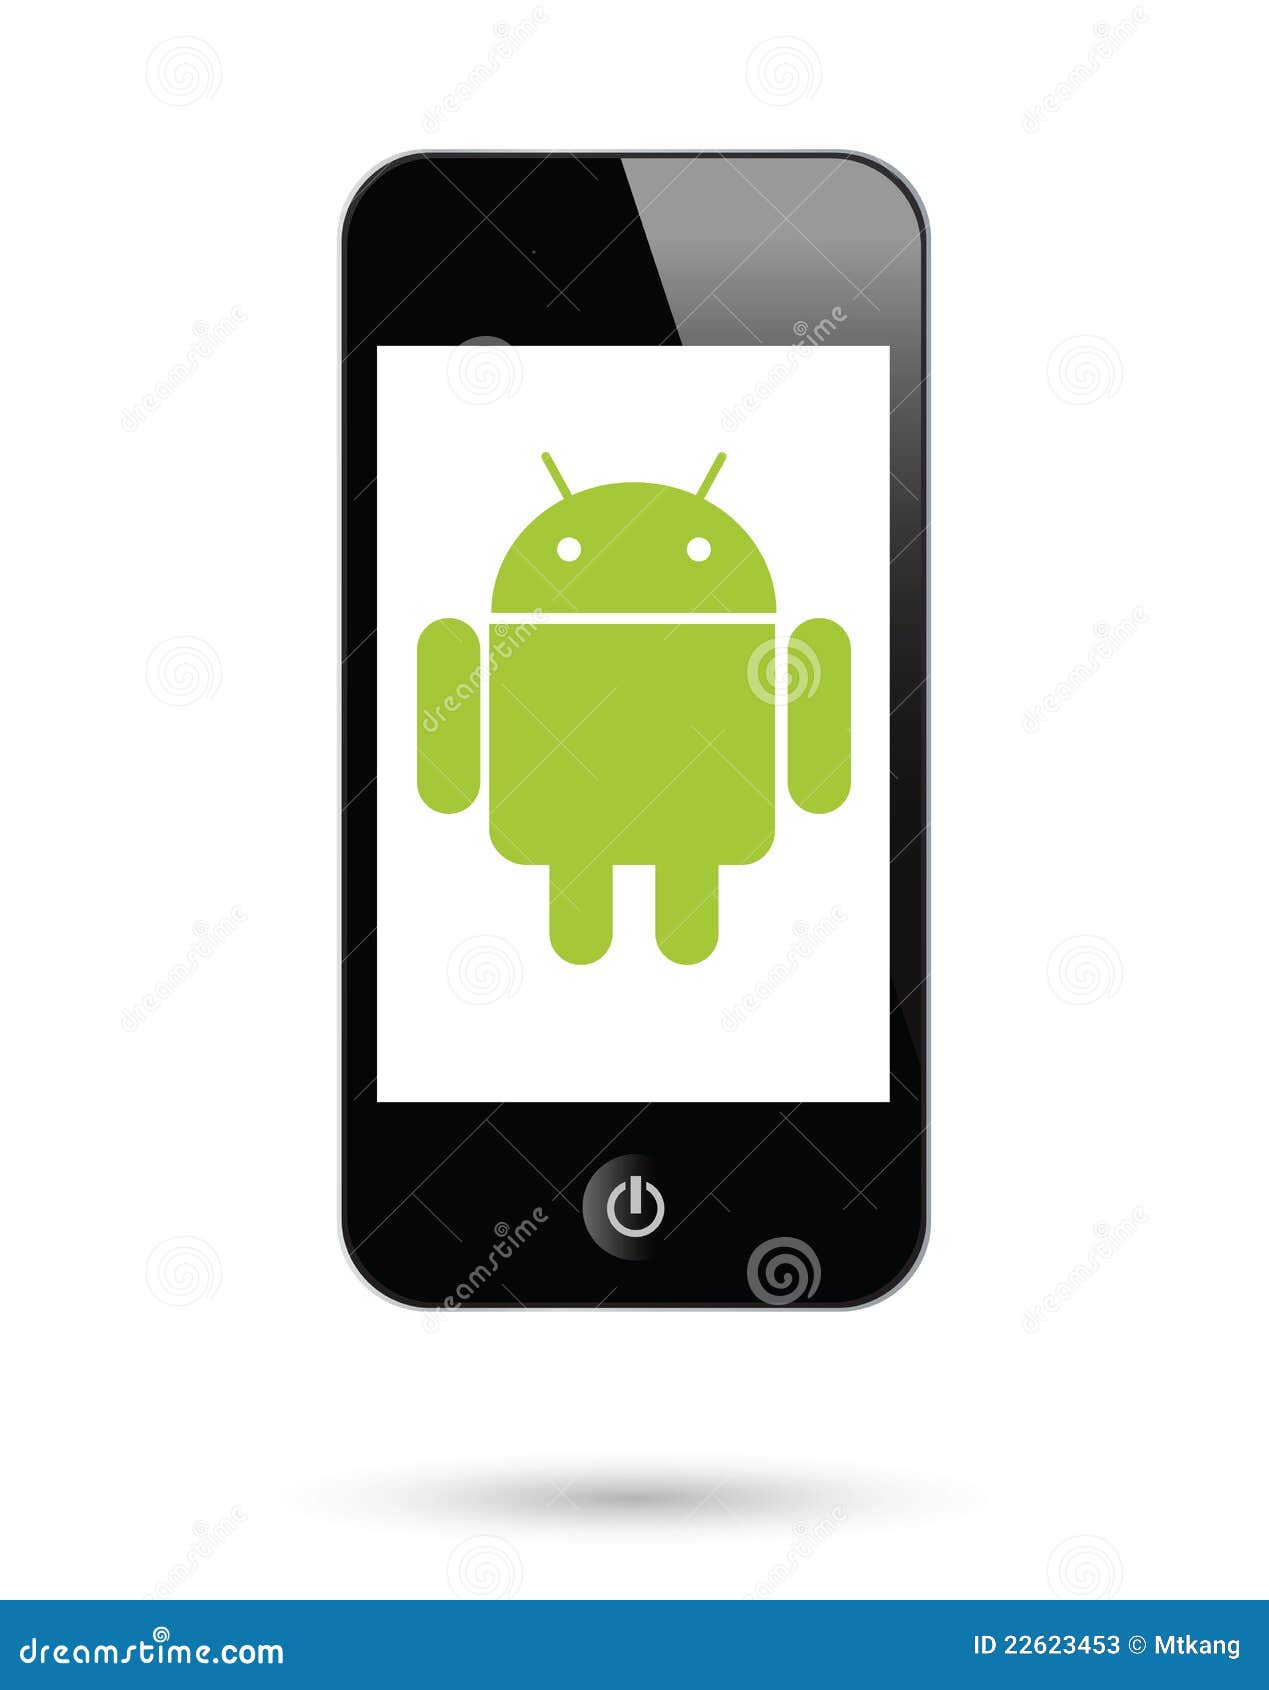 Android cell phone operating system